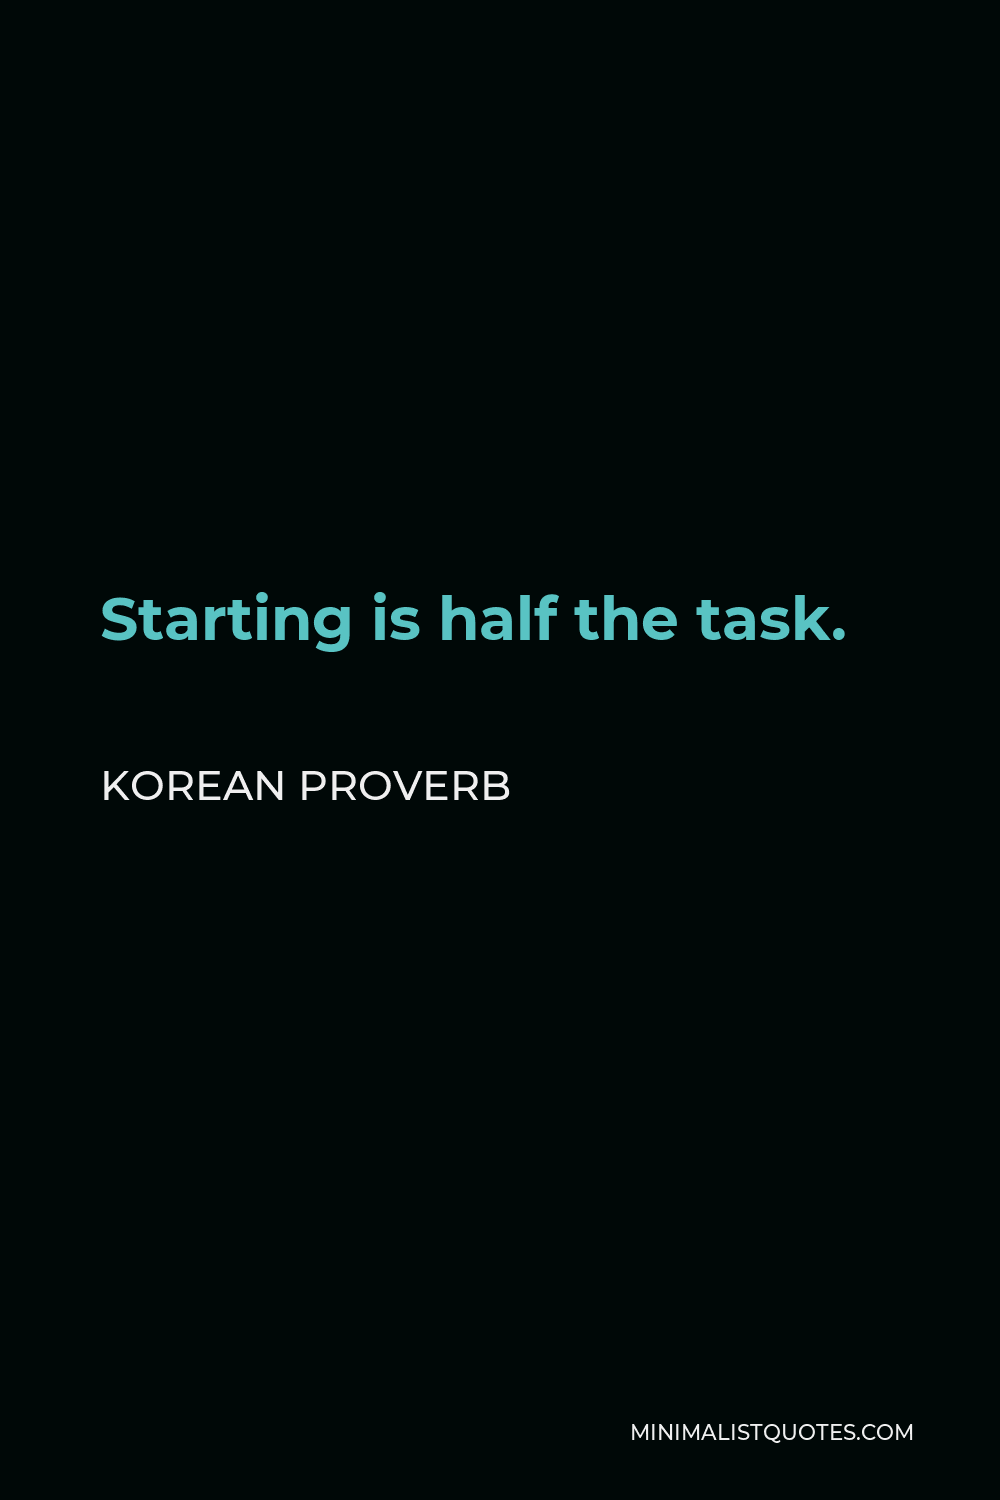 Korean Proverb Quote - Starting is half the task.